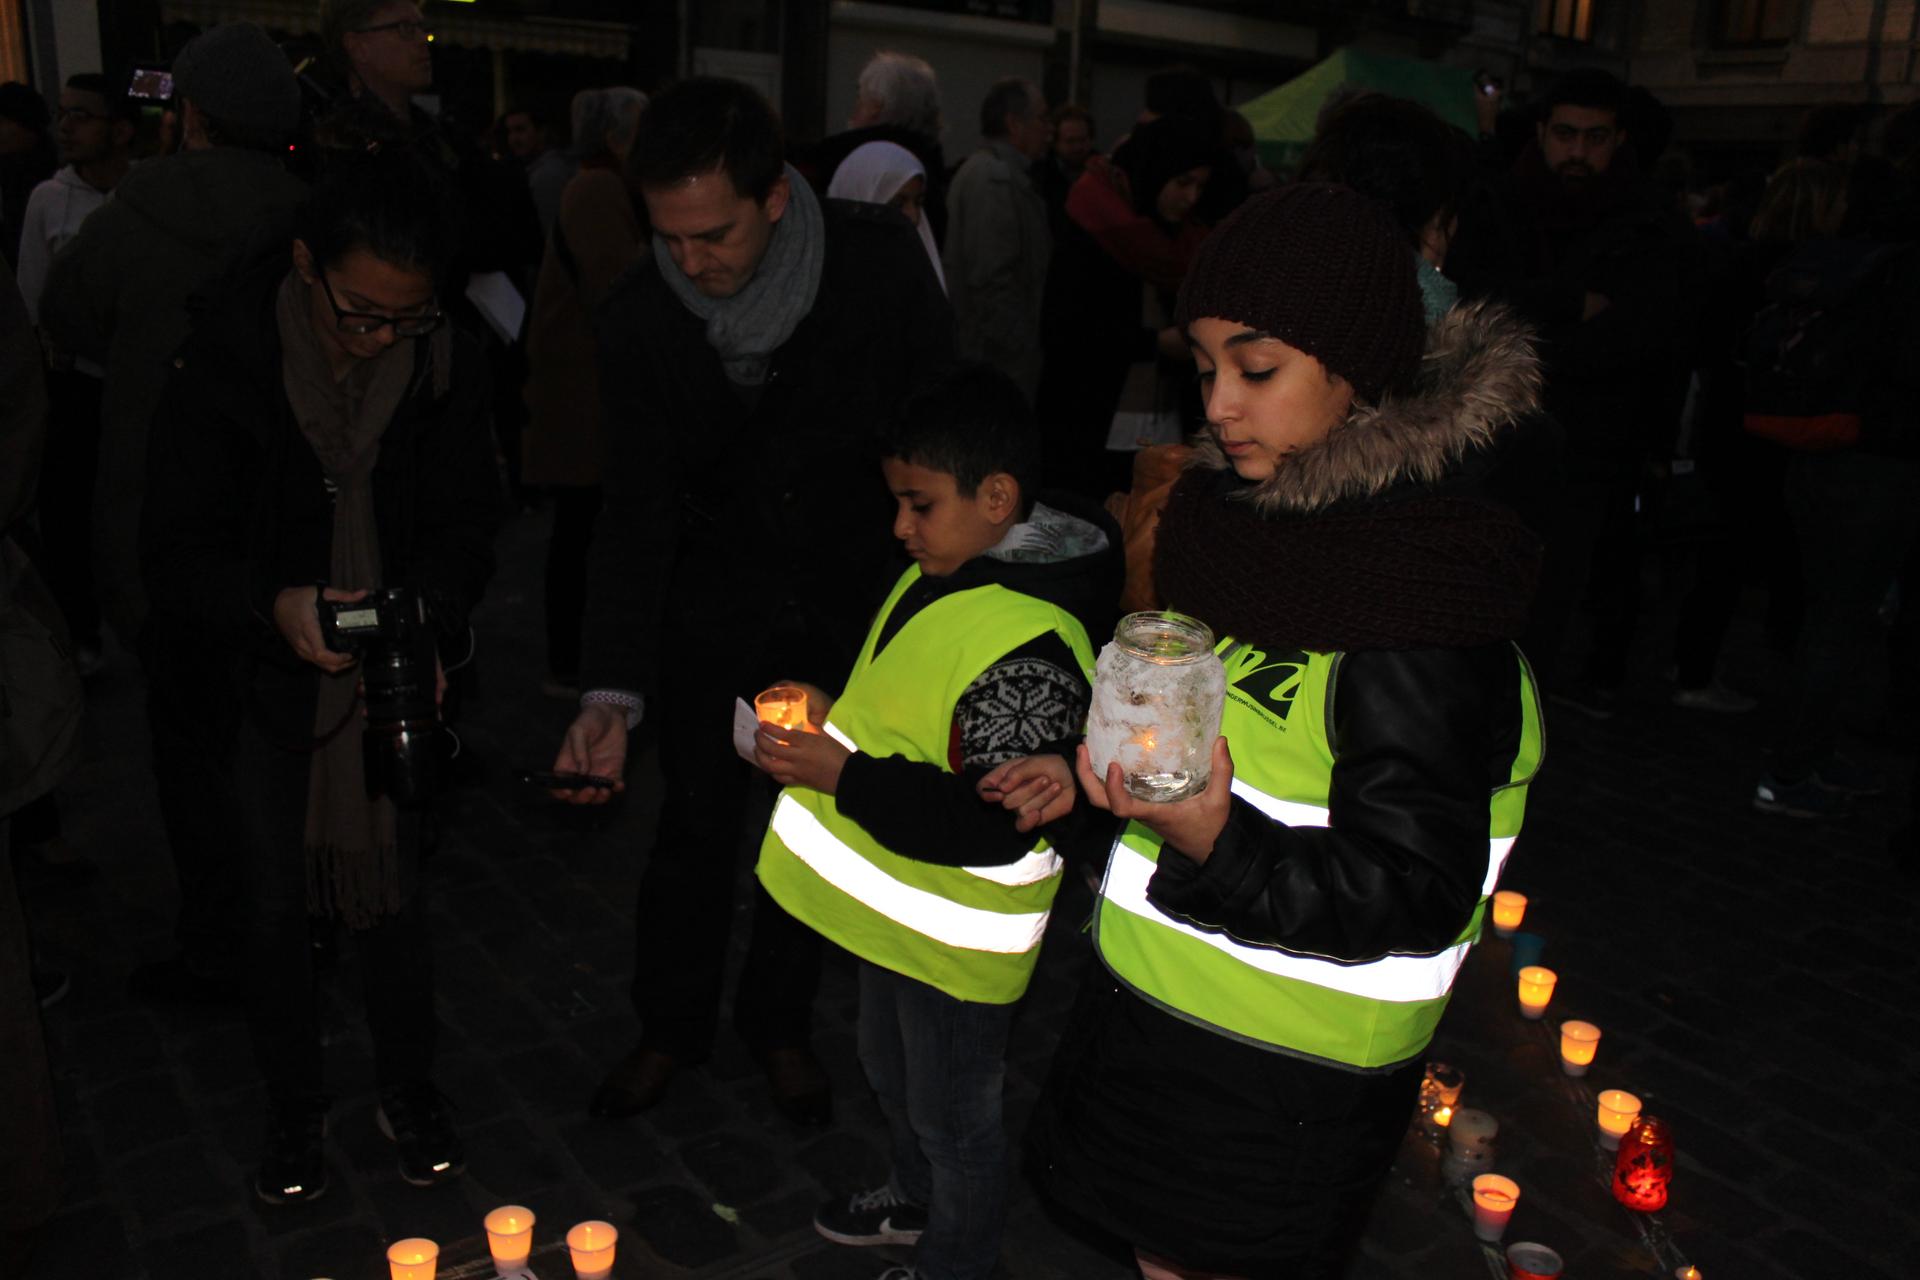 Children attend a candlelight vigil in the town square in Molenbeek, a neighborhood in Brussels with ties to the alleged perpetrators of the Paris attacks.